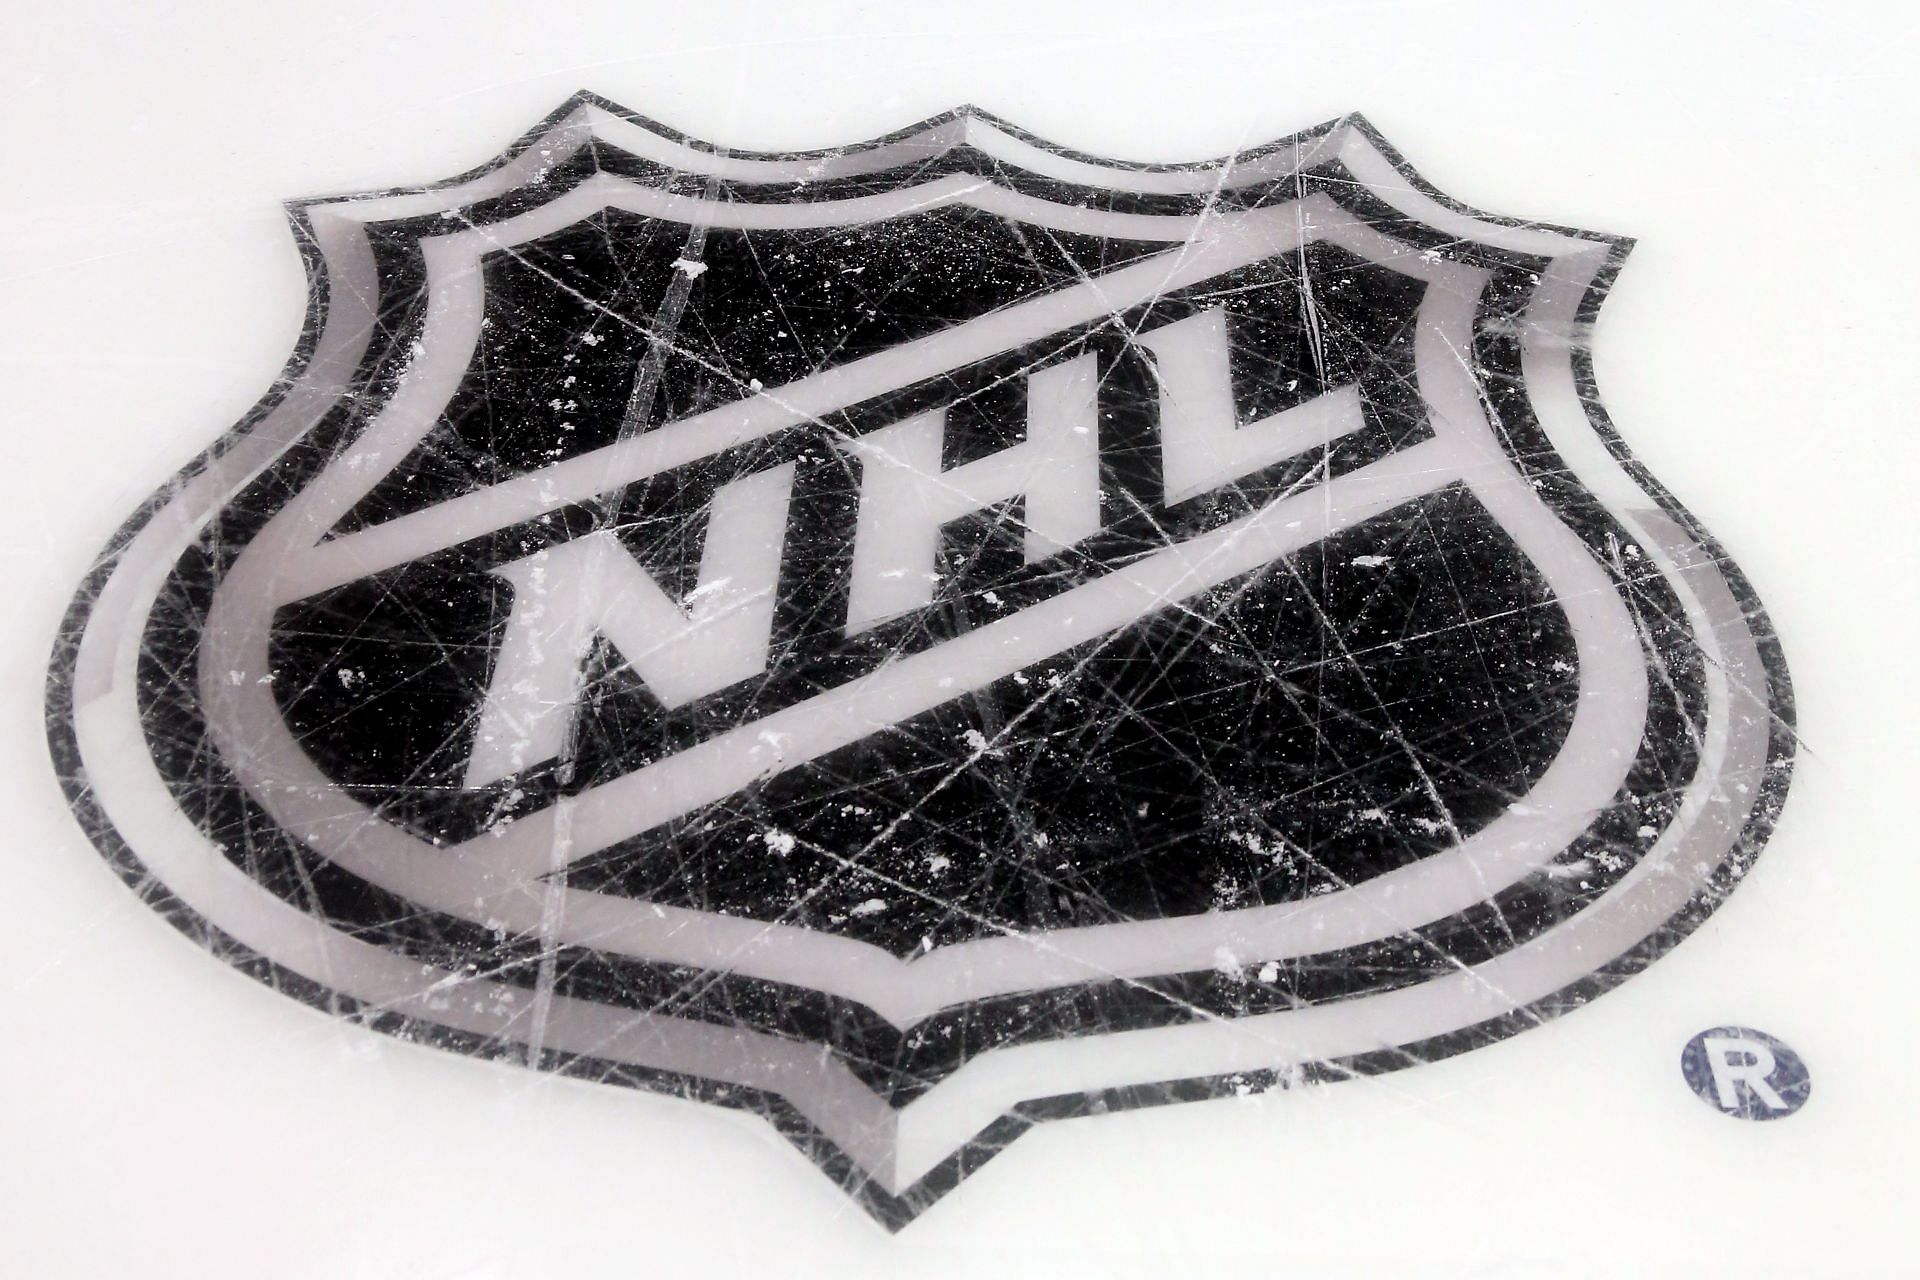 How much does NHL Center Ice cost? All you need to know about pricing and package information